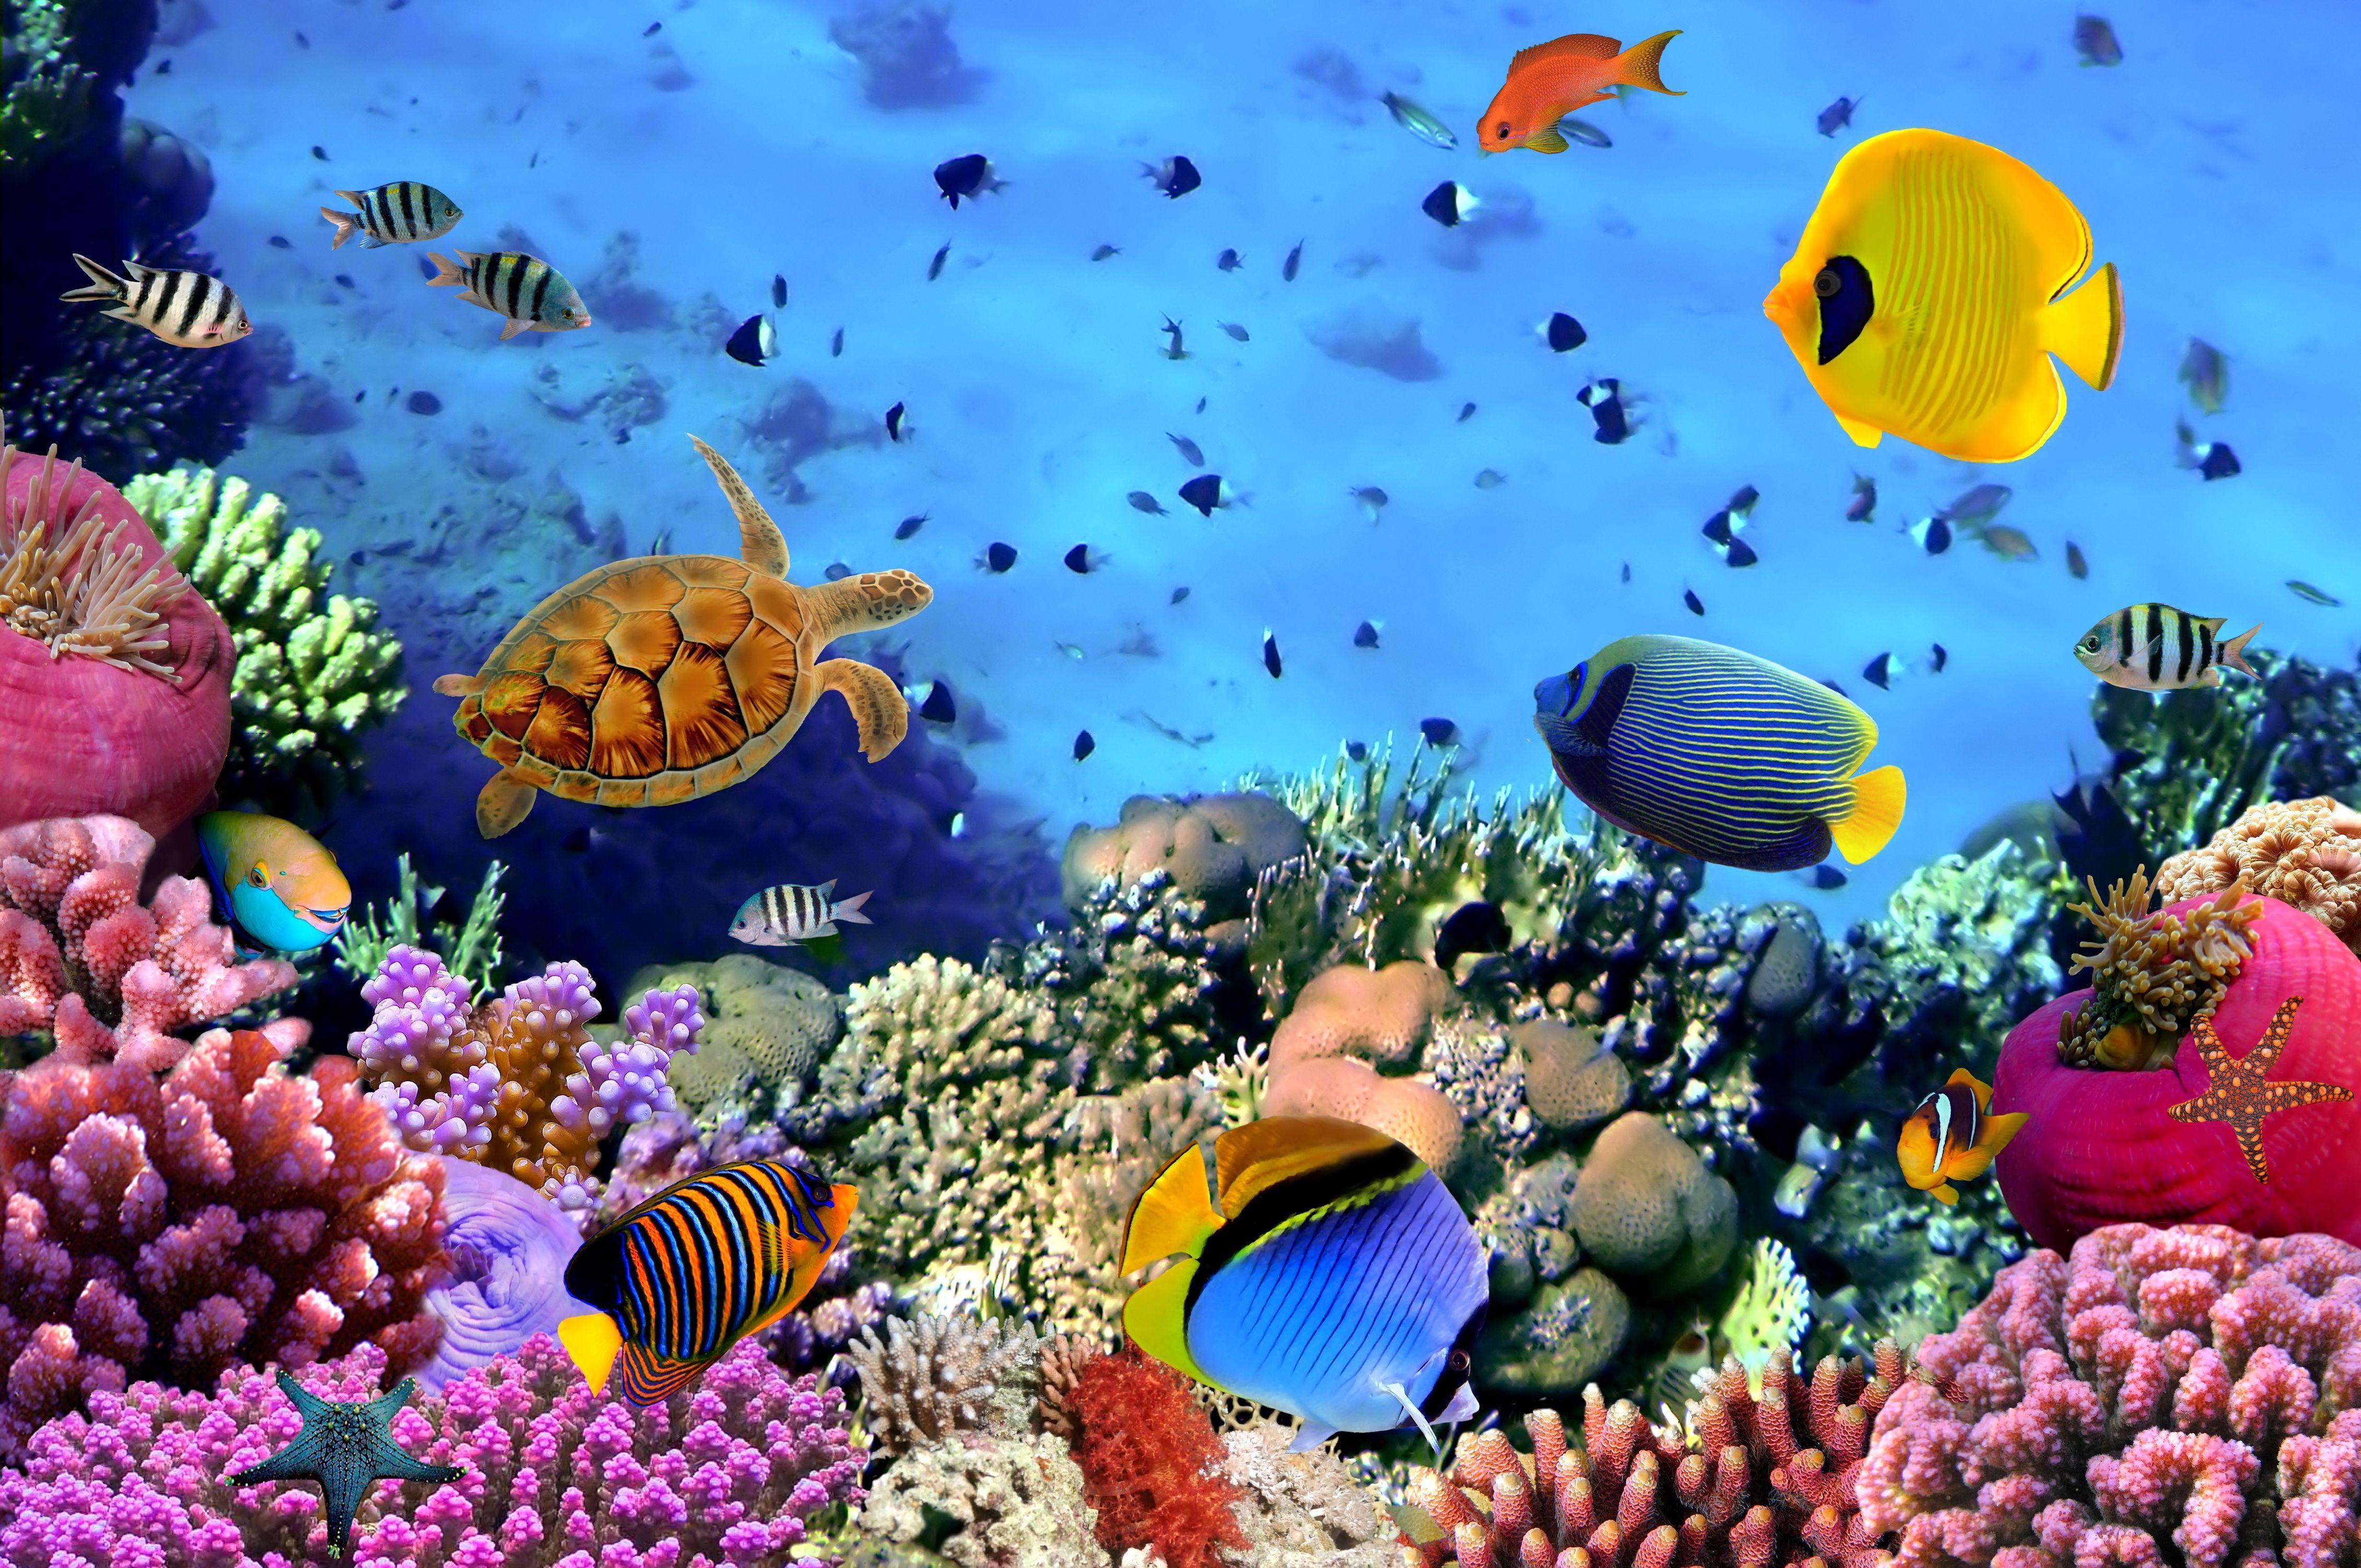 Undersea Picture Wallpaper, Awesome Undersea Picture